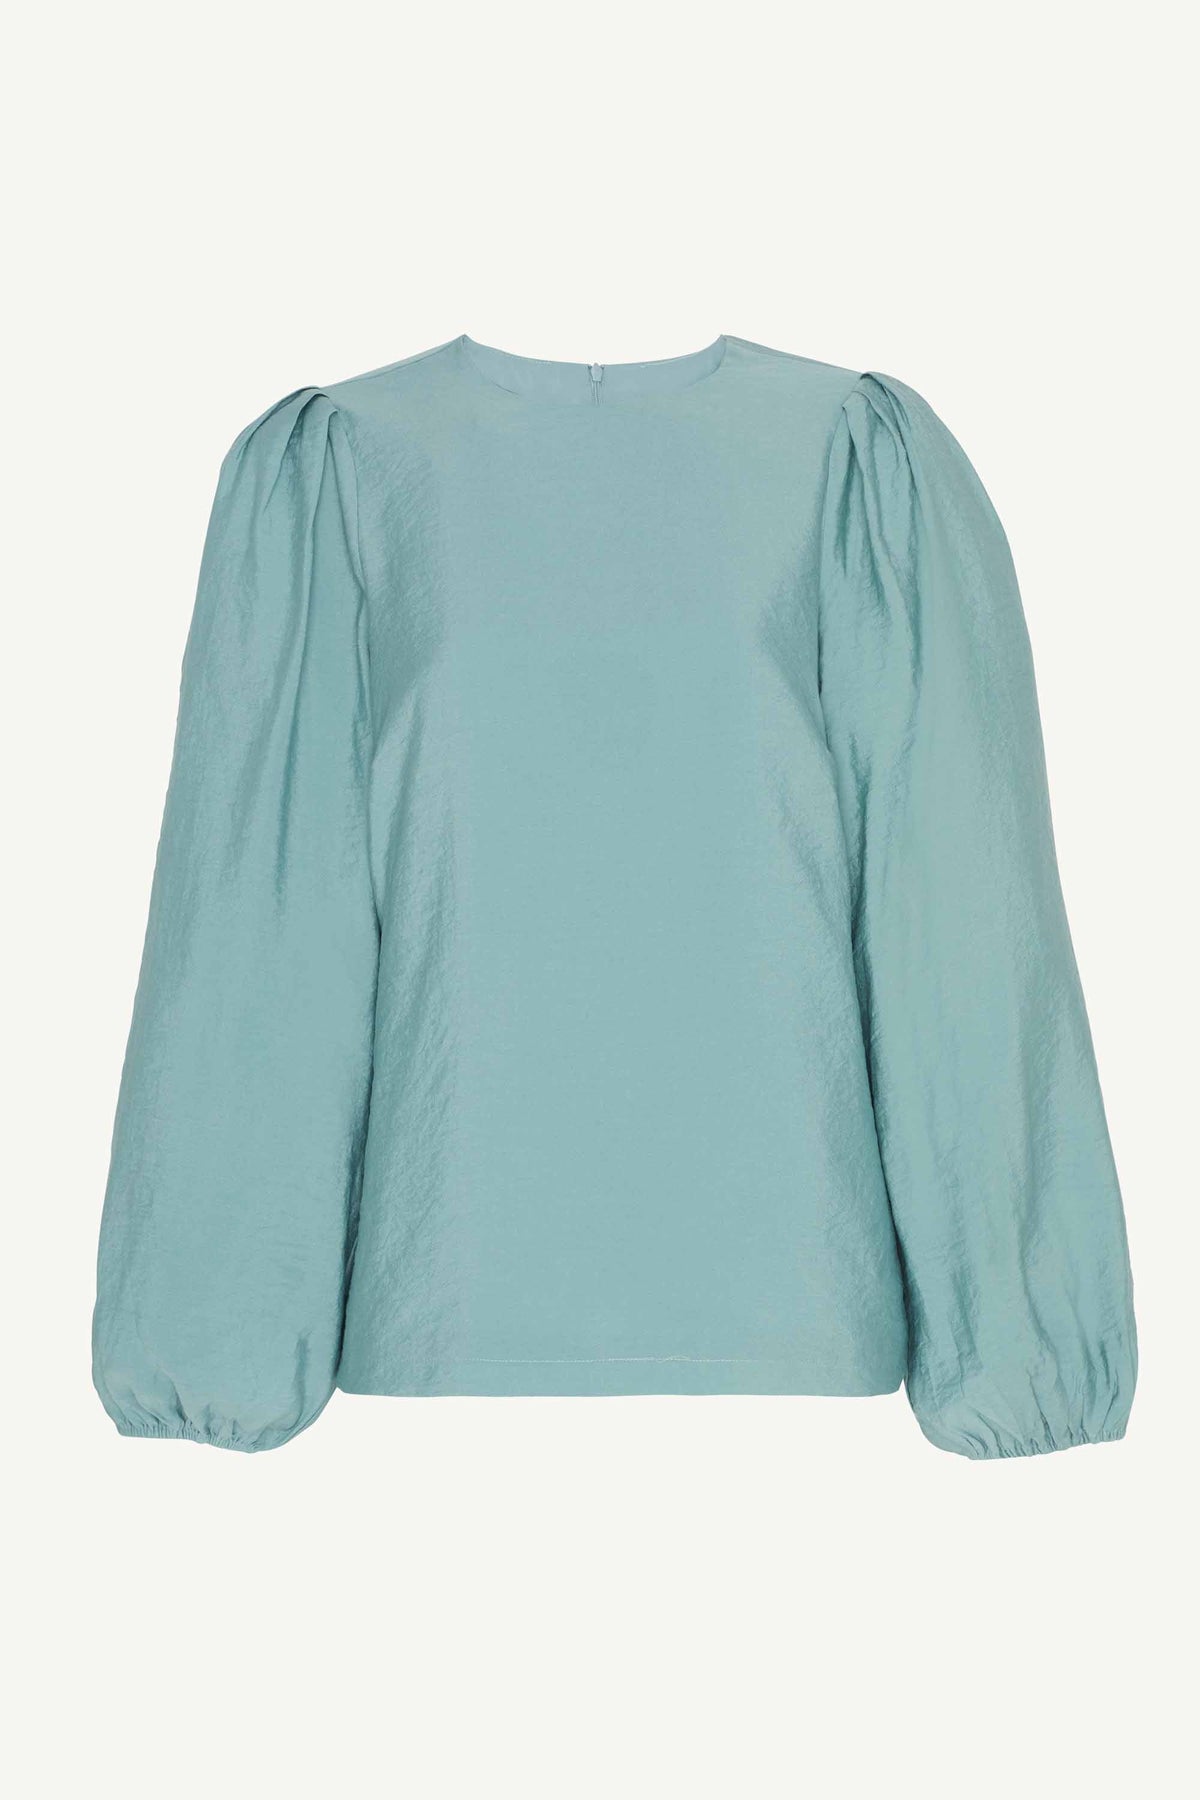 Lora Balloon Sleeve Top - Loden Frost Clothing Veiled Collection 